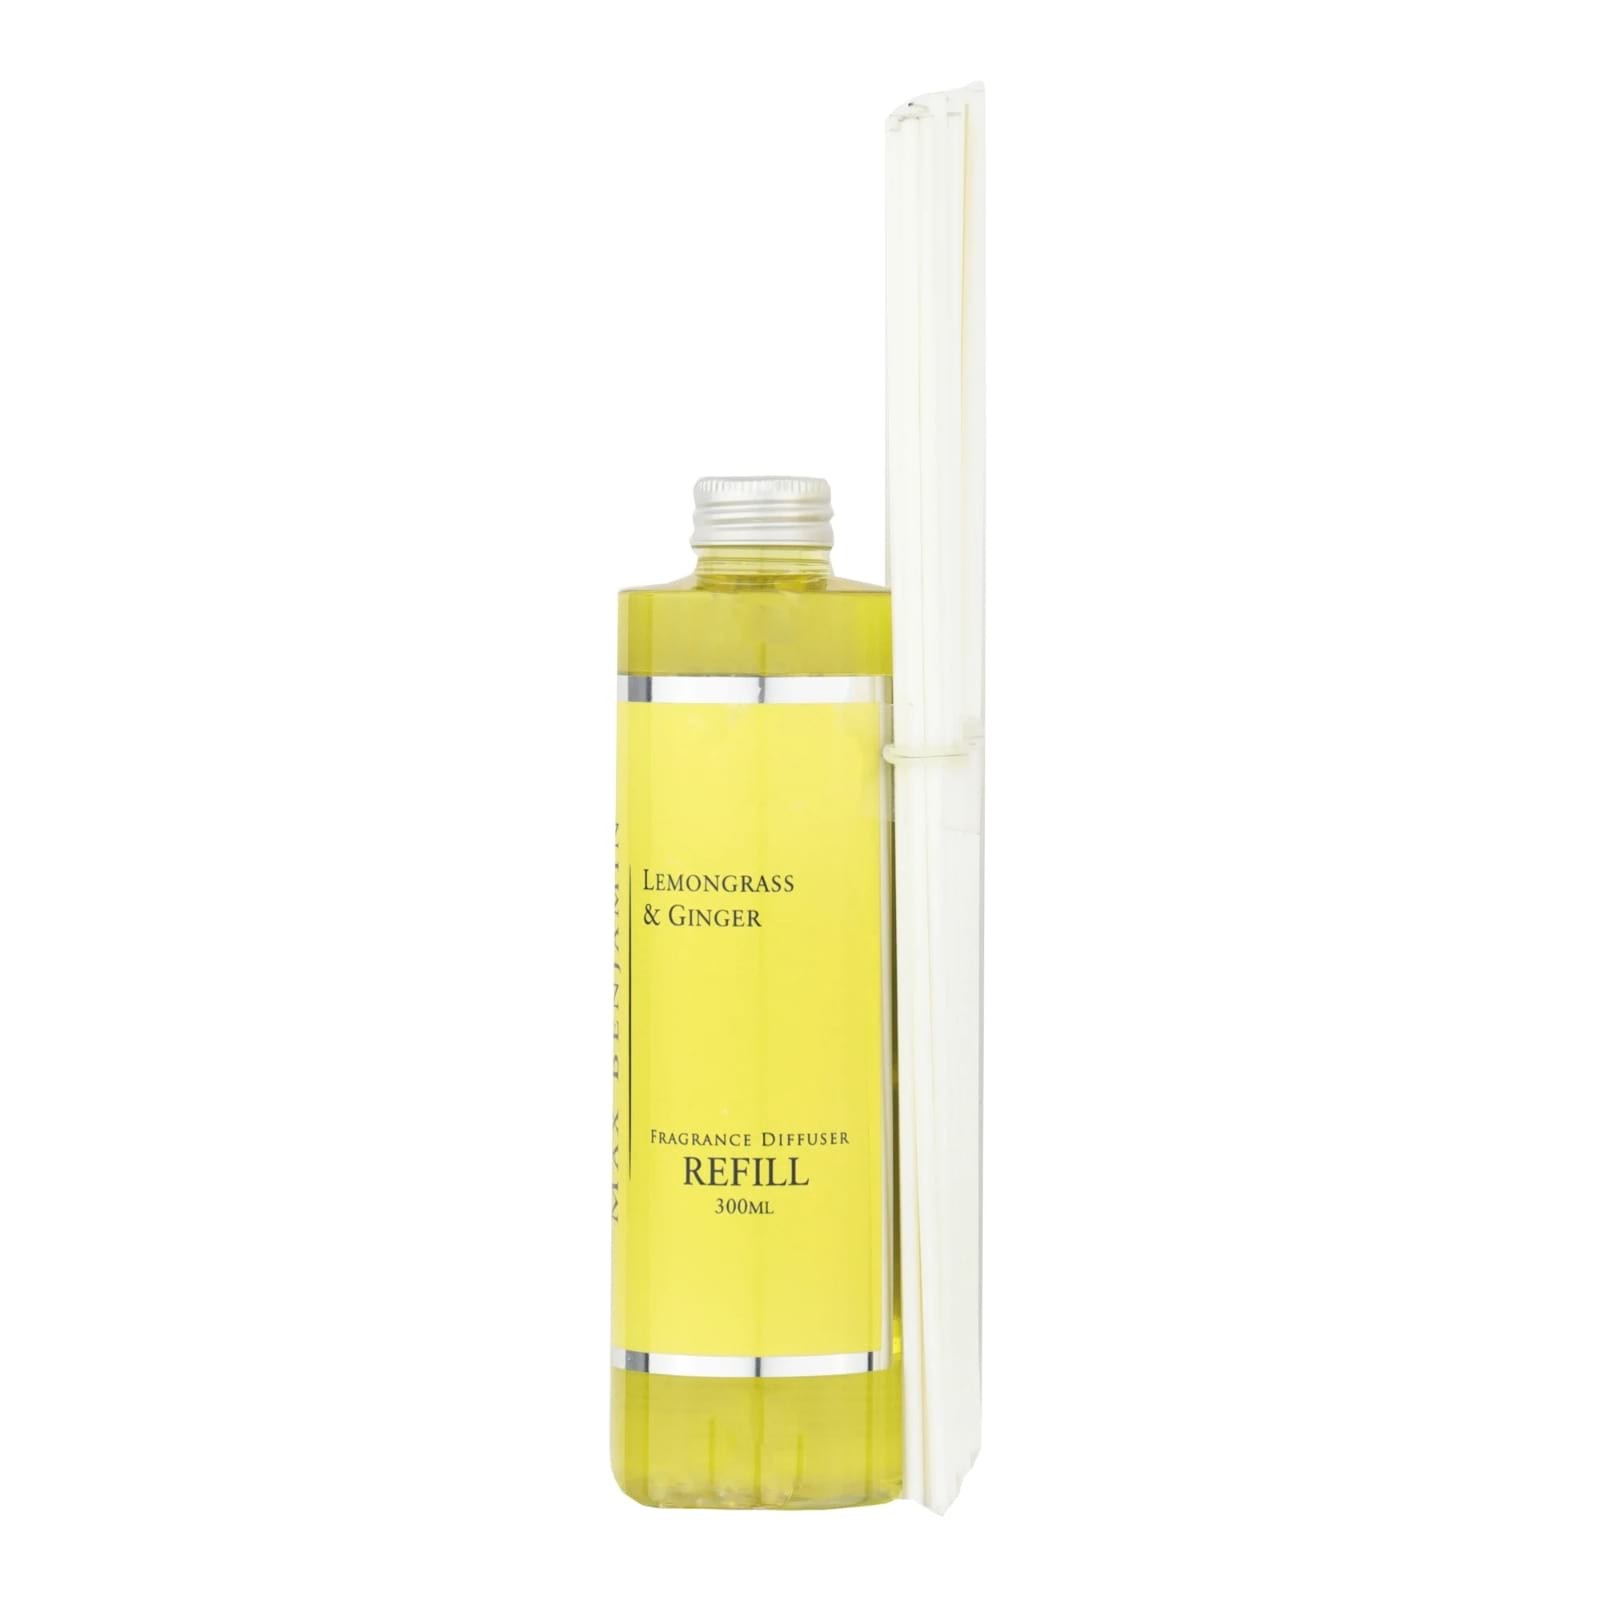 Max Benjamin Lemongrass And Ginger Fragrance Diffuser Refill 300ml Design Is This 4708